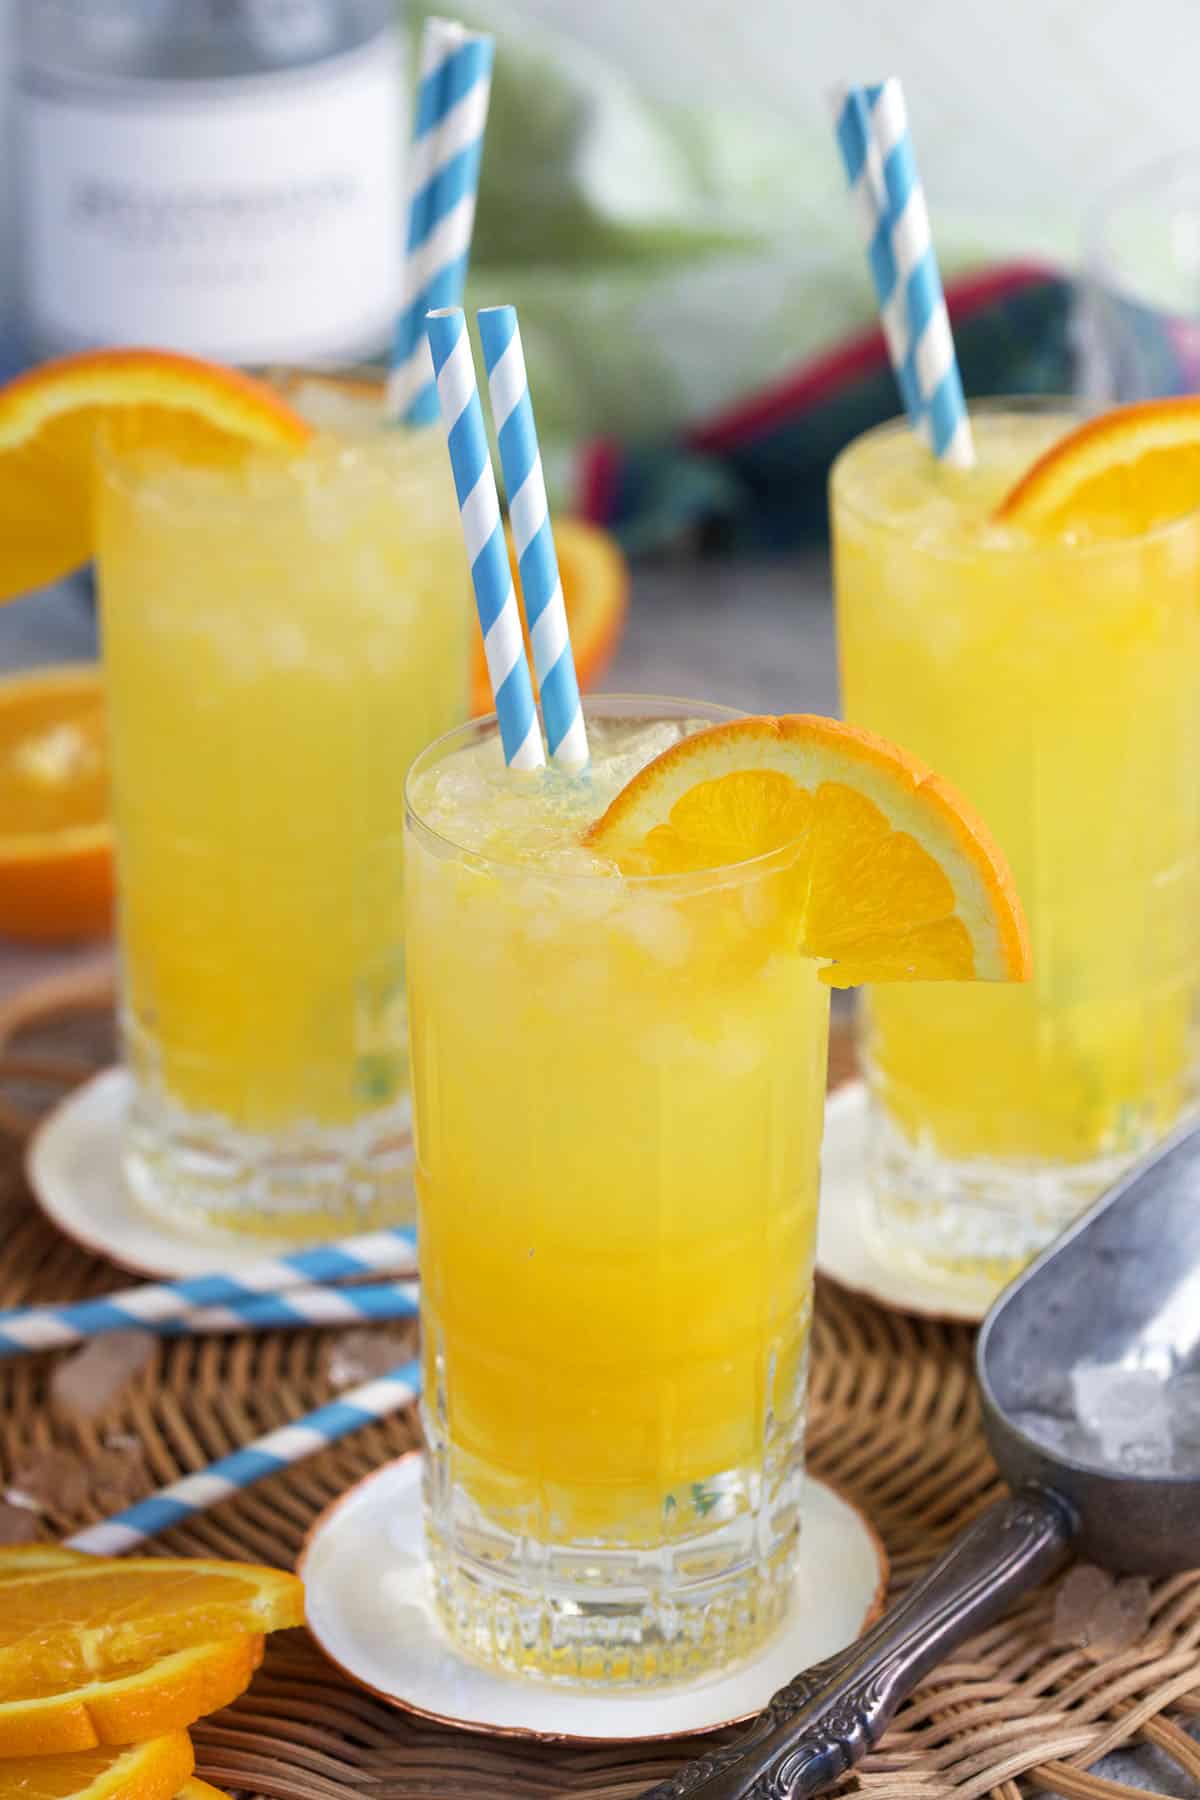 Orange Crush Cocktail in a collins glass with an orange wedge on the side and blue and white striped straws.